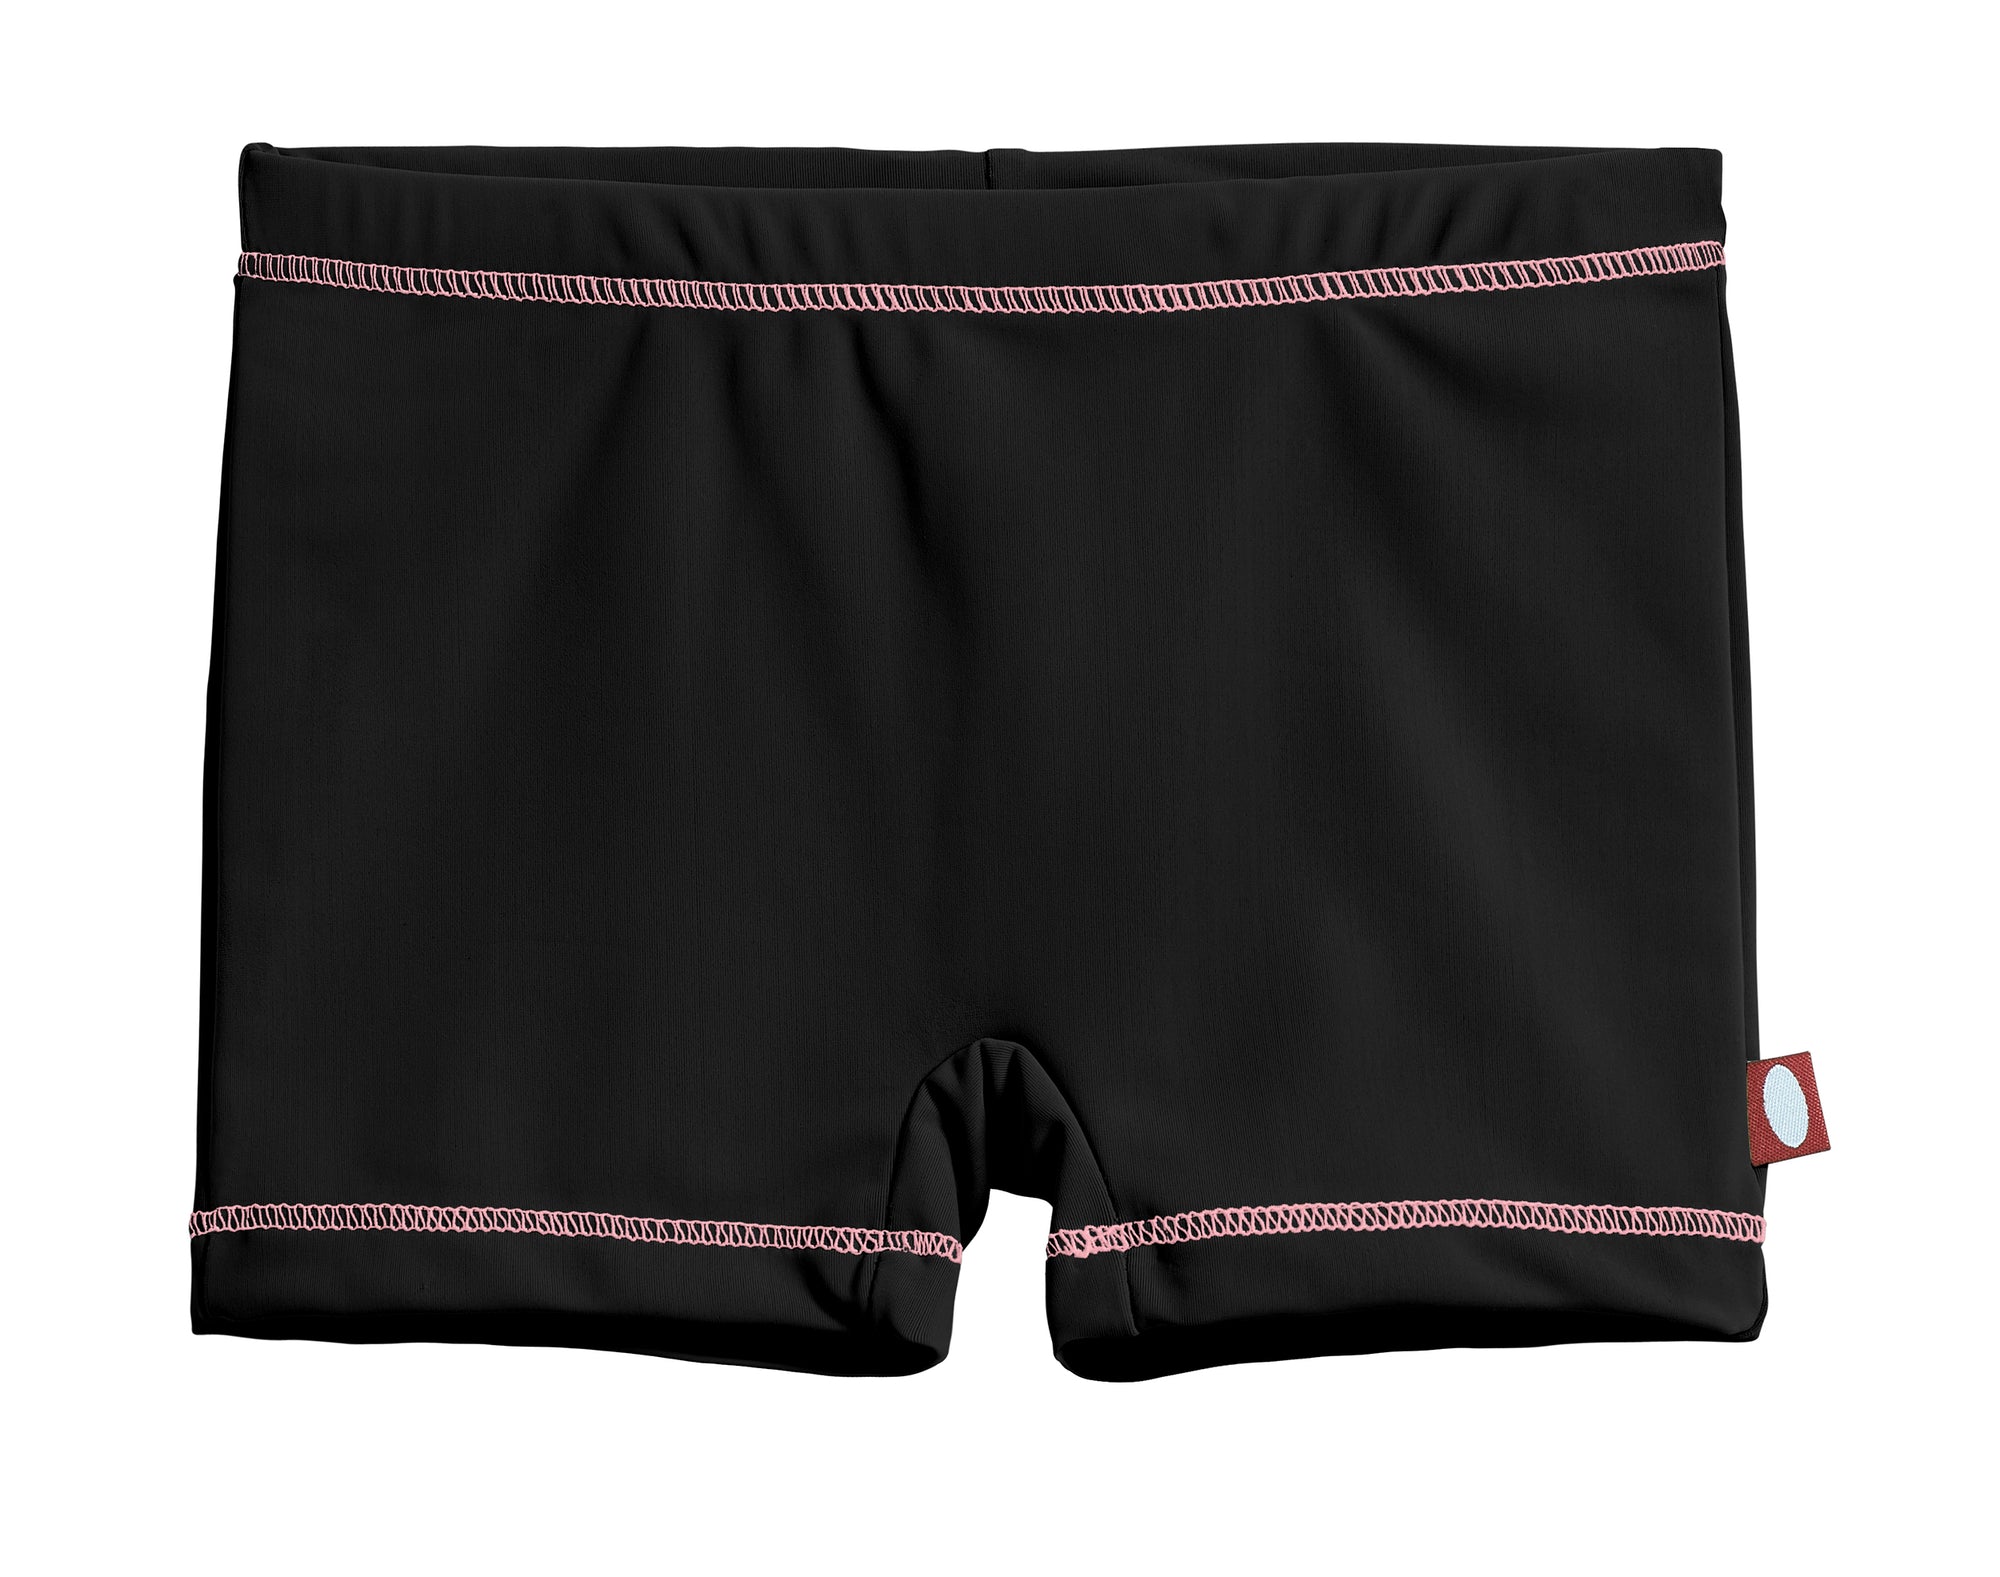 Fabgruh Black Color Boy Shorts Panty at Rs 100/piece in Surat